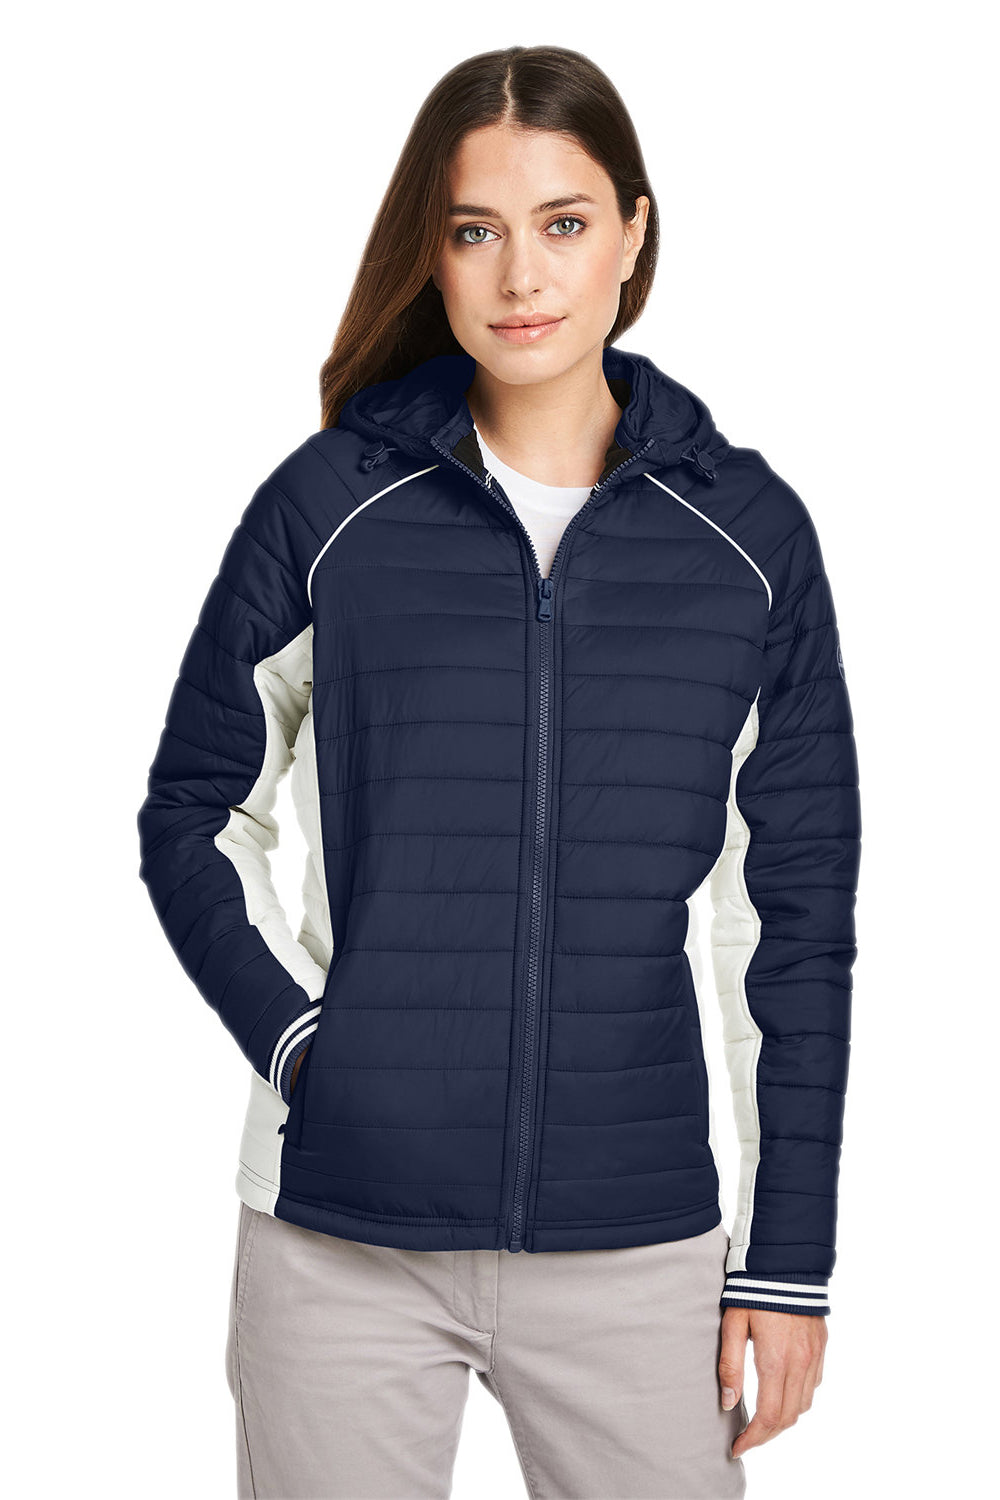 Nautica N17187 Womens Nautical Mile Packable Full Zip Hooded Puffer Jacket Night Navy Blue/Antique White Front